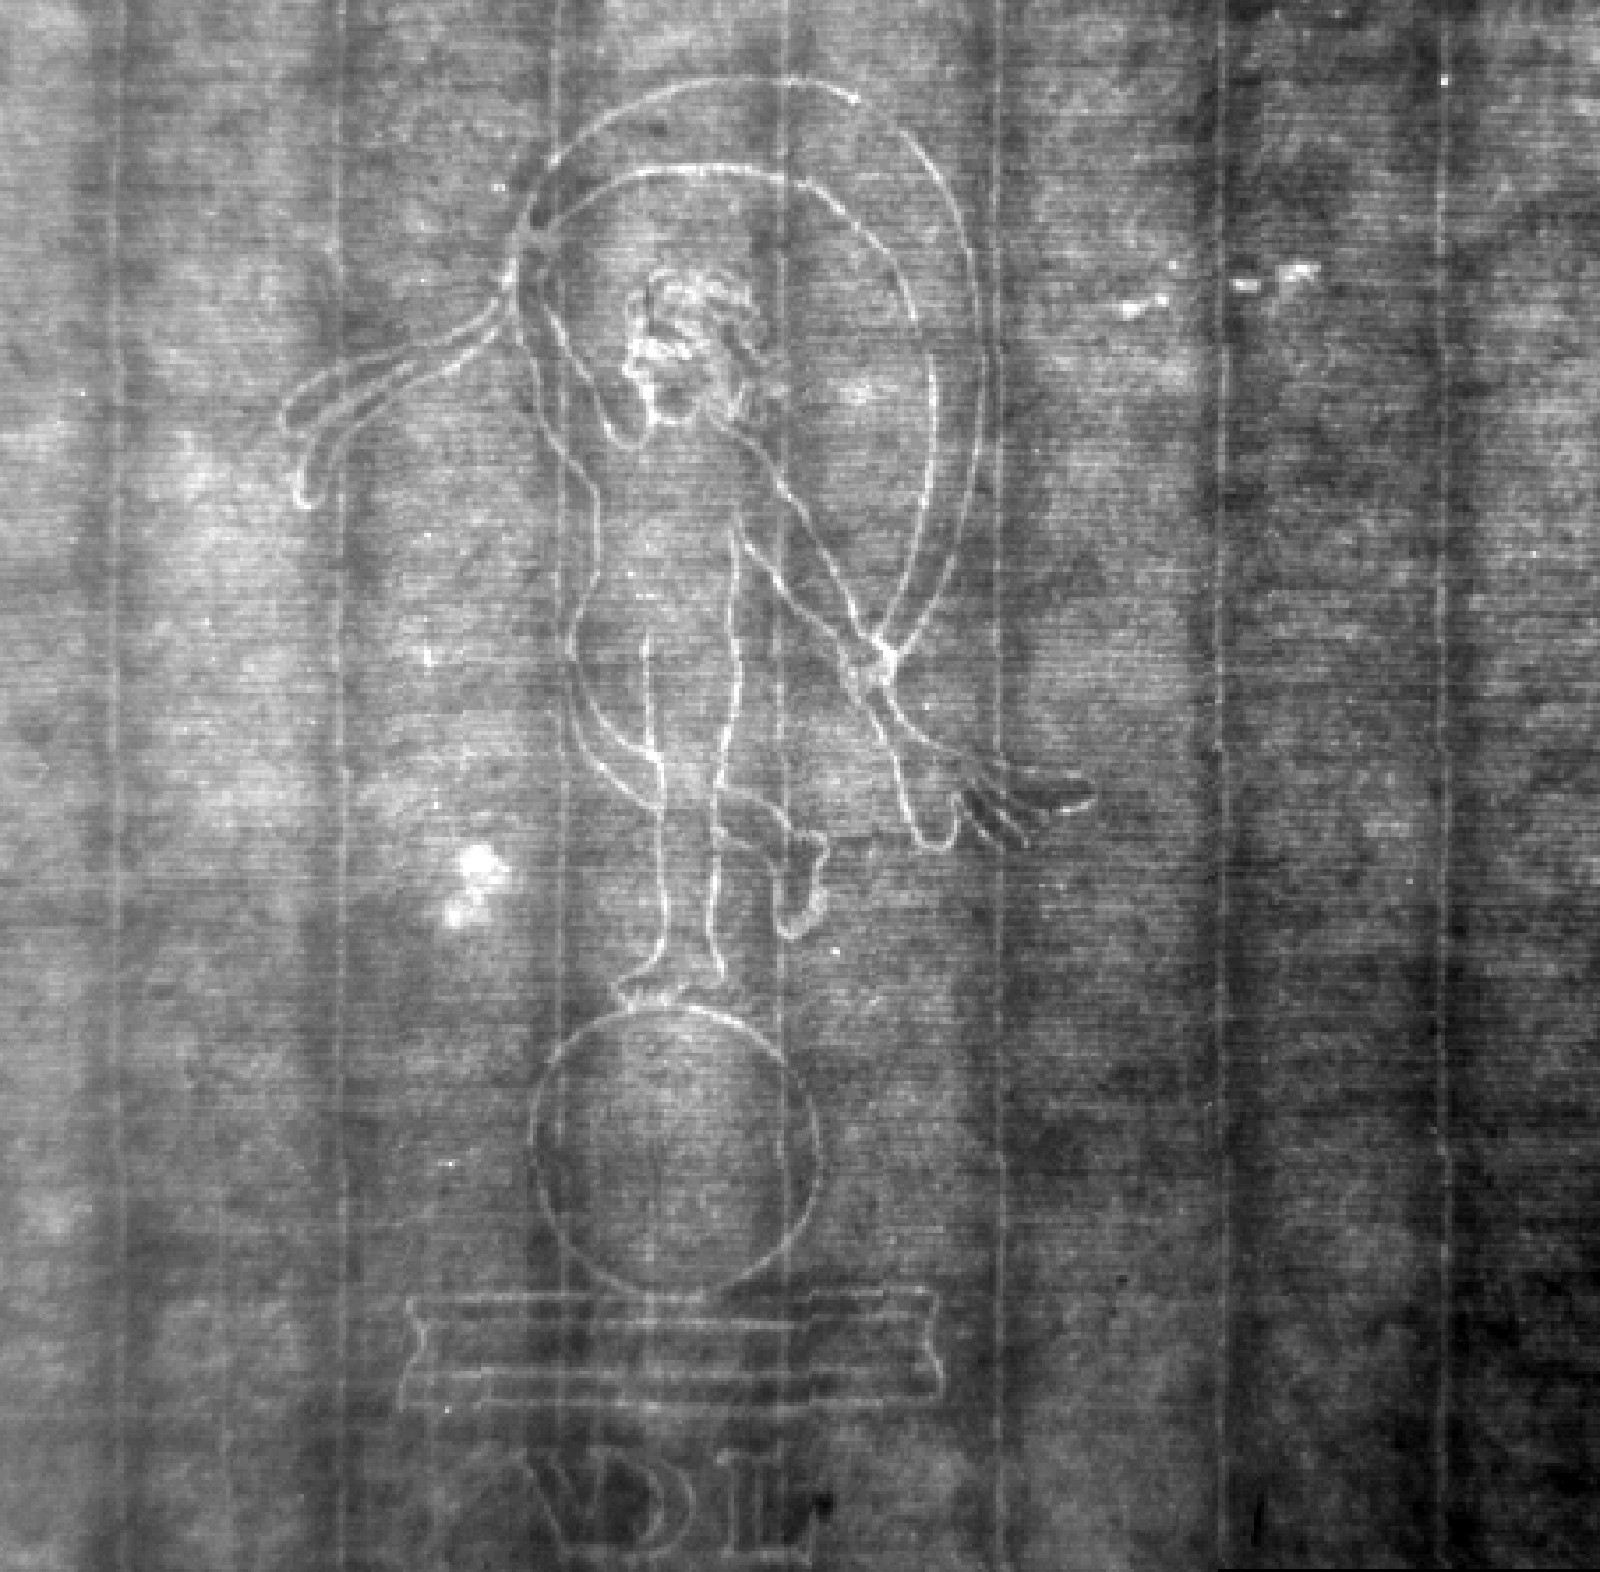 A typical watermark as it would be found on the paper (thermography).